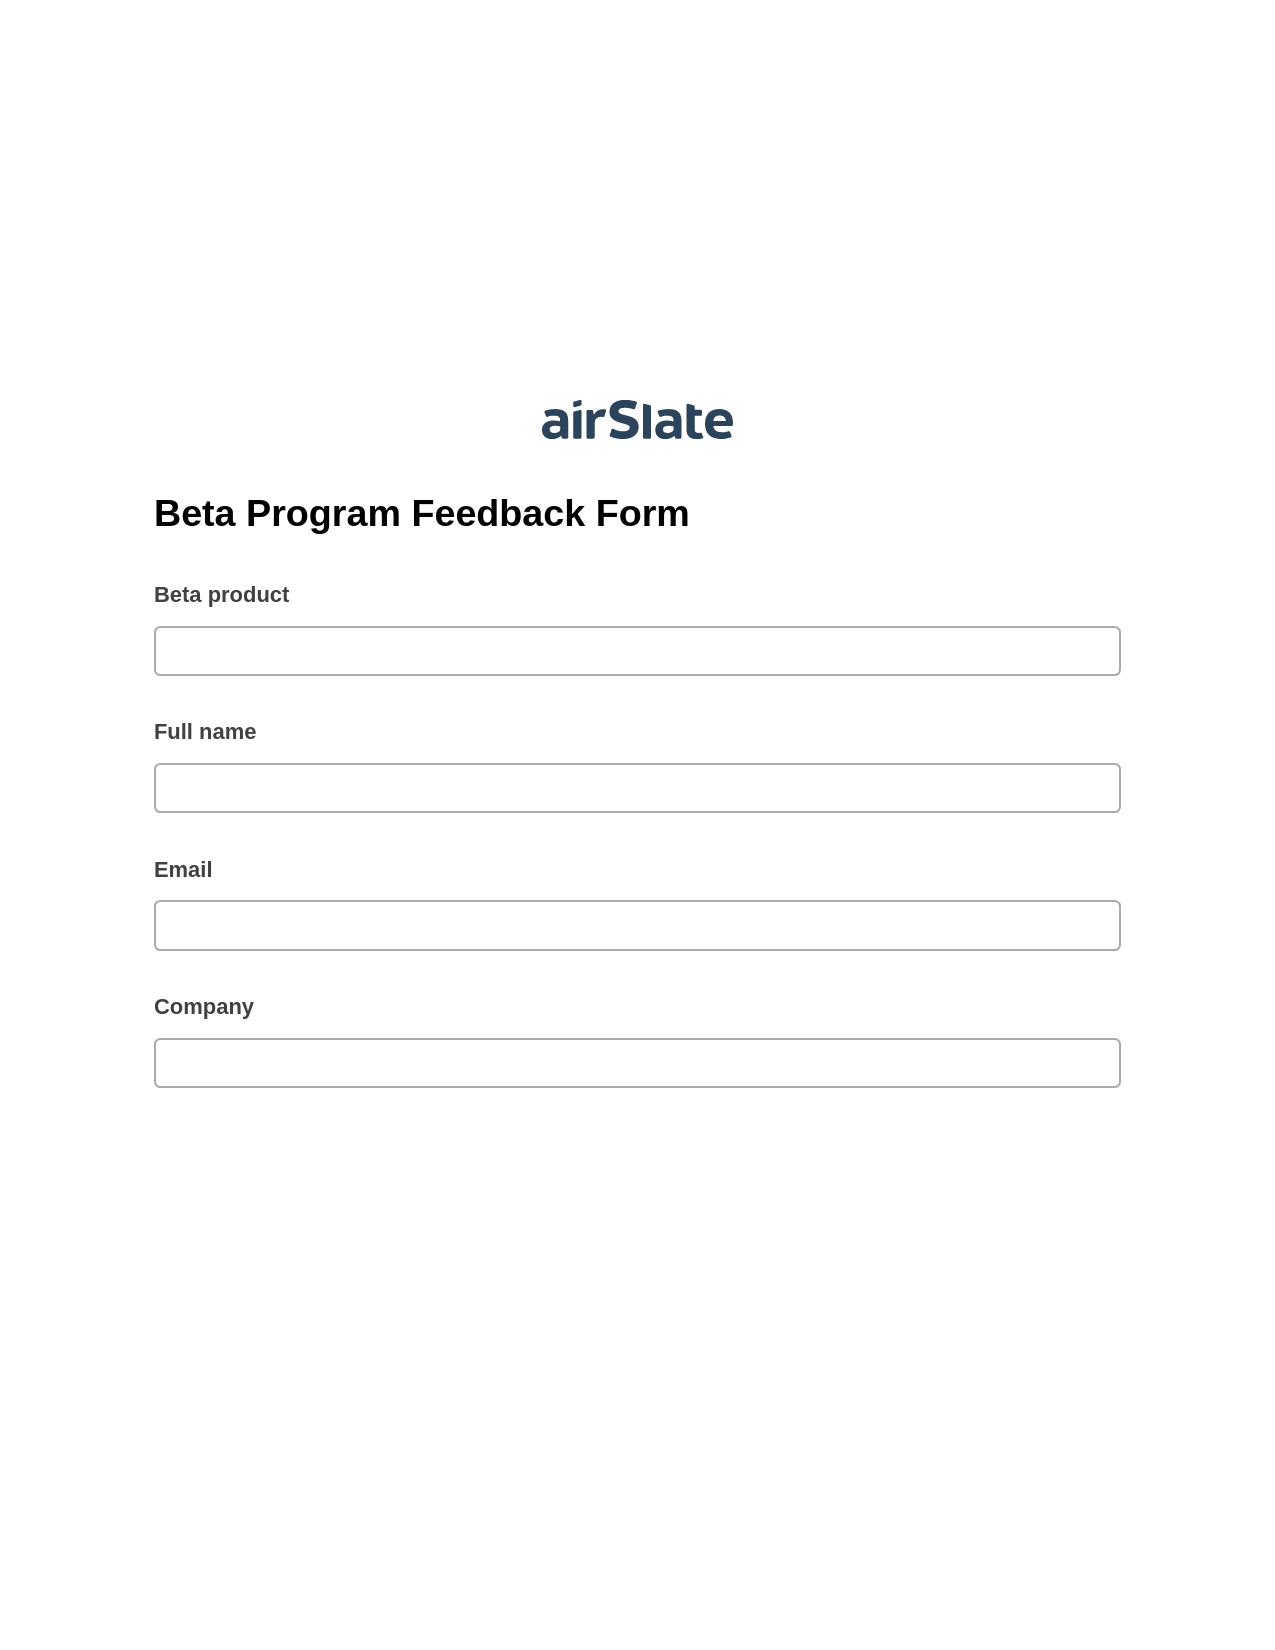 Beta Program Feedback Form Pre-fill from another Slate Bot, Lock the slate bot, Archive to SharePoint Folder Bot